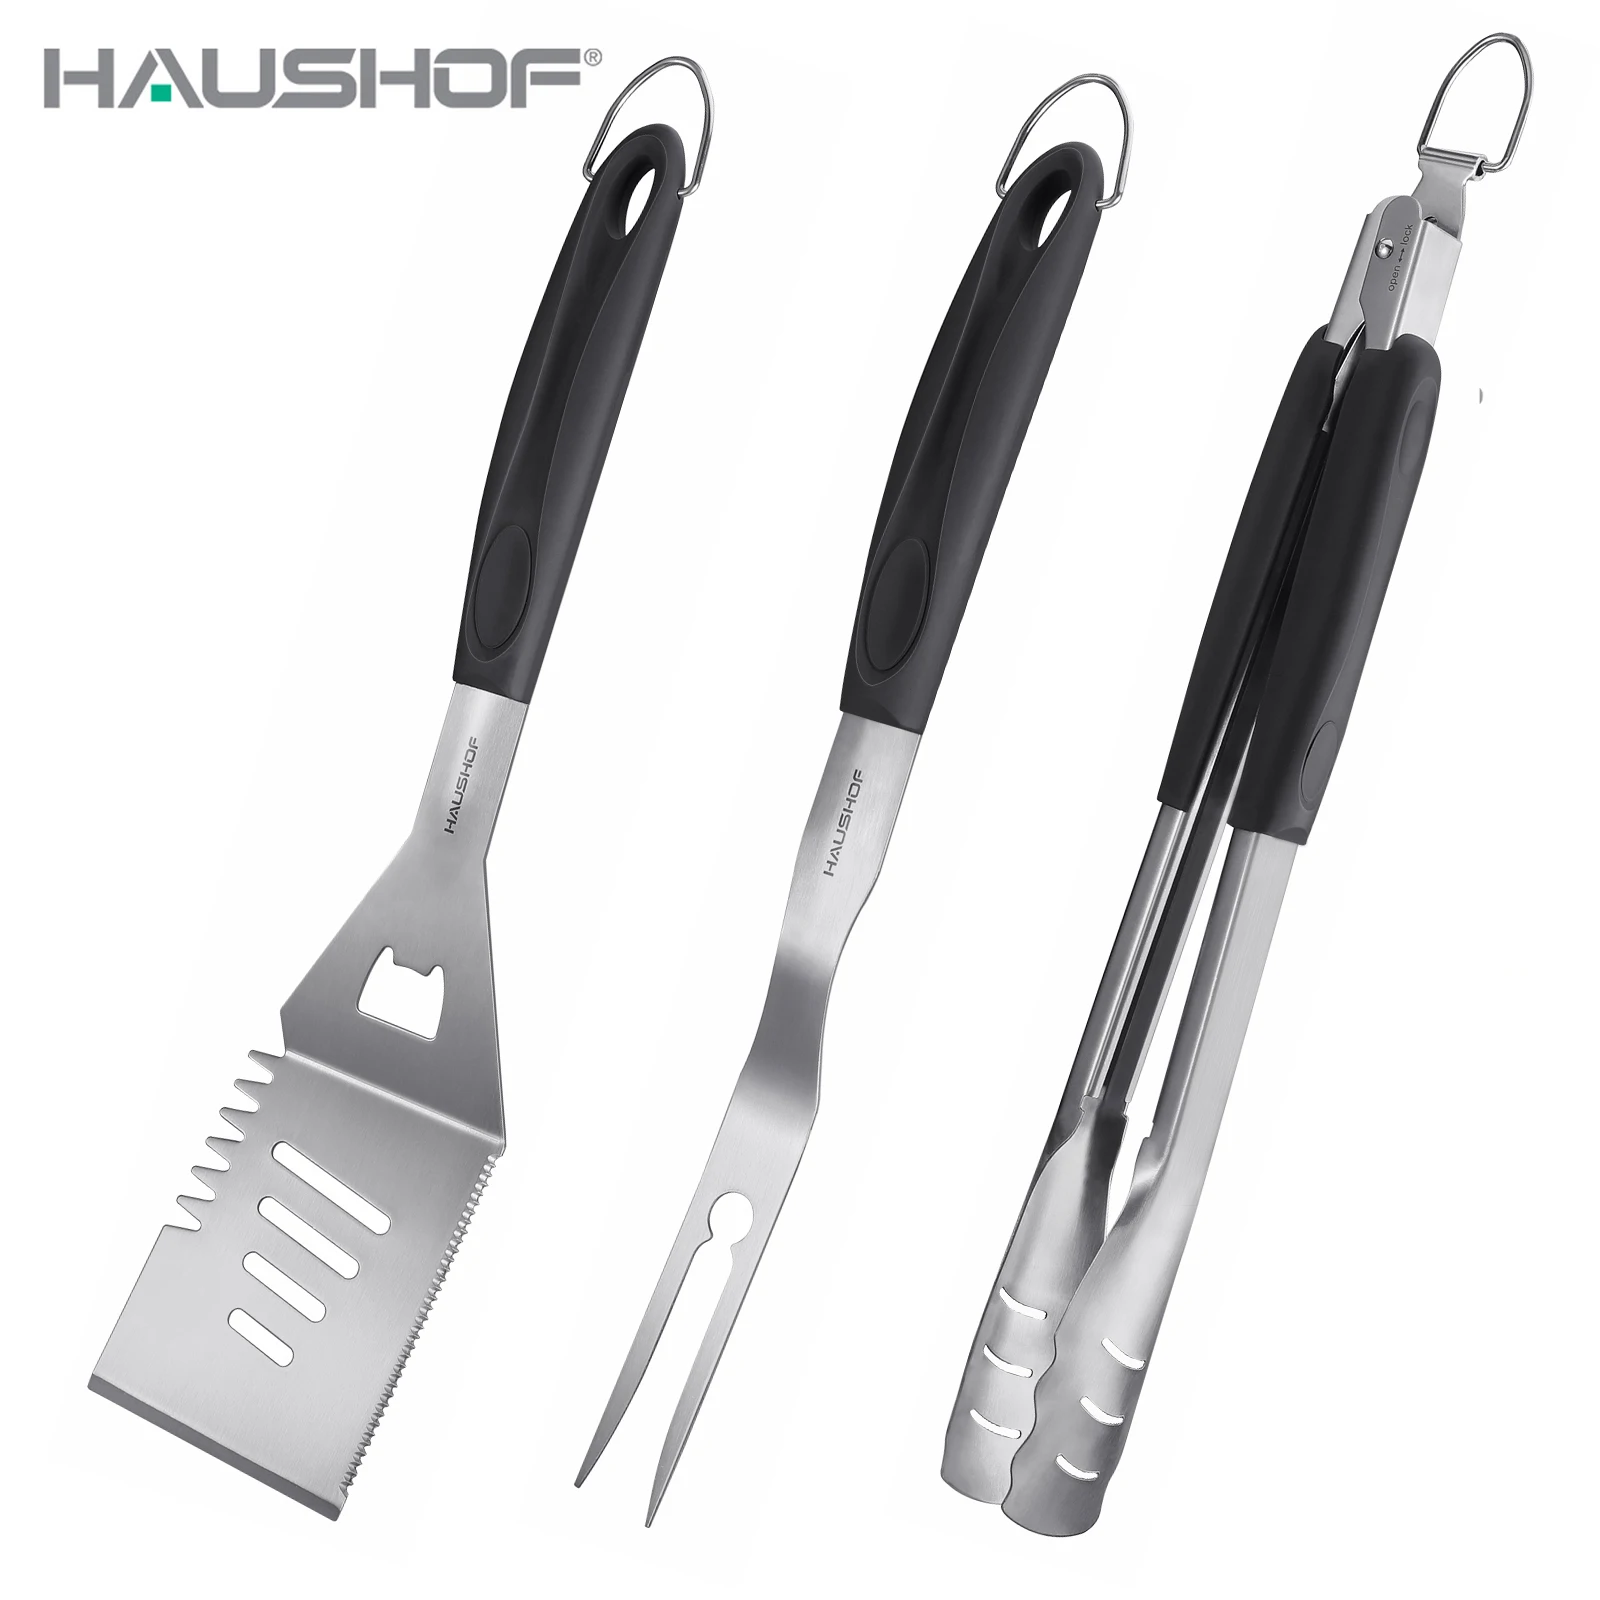 

HAUSHOF 3PC Heavy Duty BBQ Grilling Tool Set Food Safe Grade Stainless Steel Barbeque Tools Combination with Hook Polish Kits